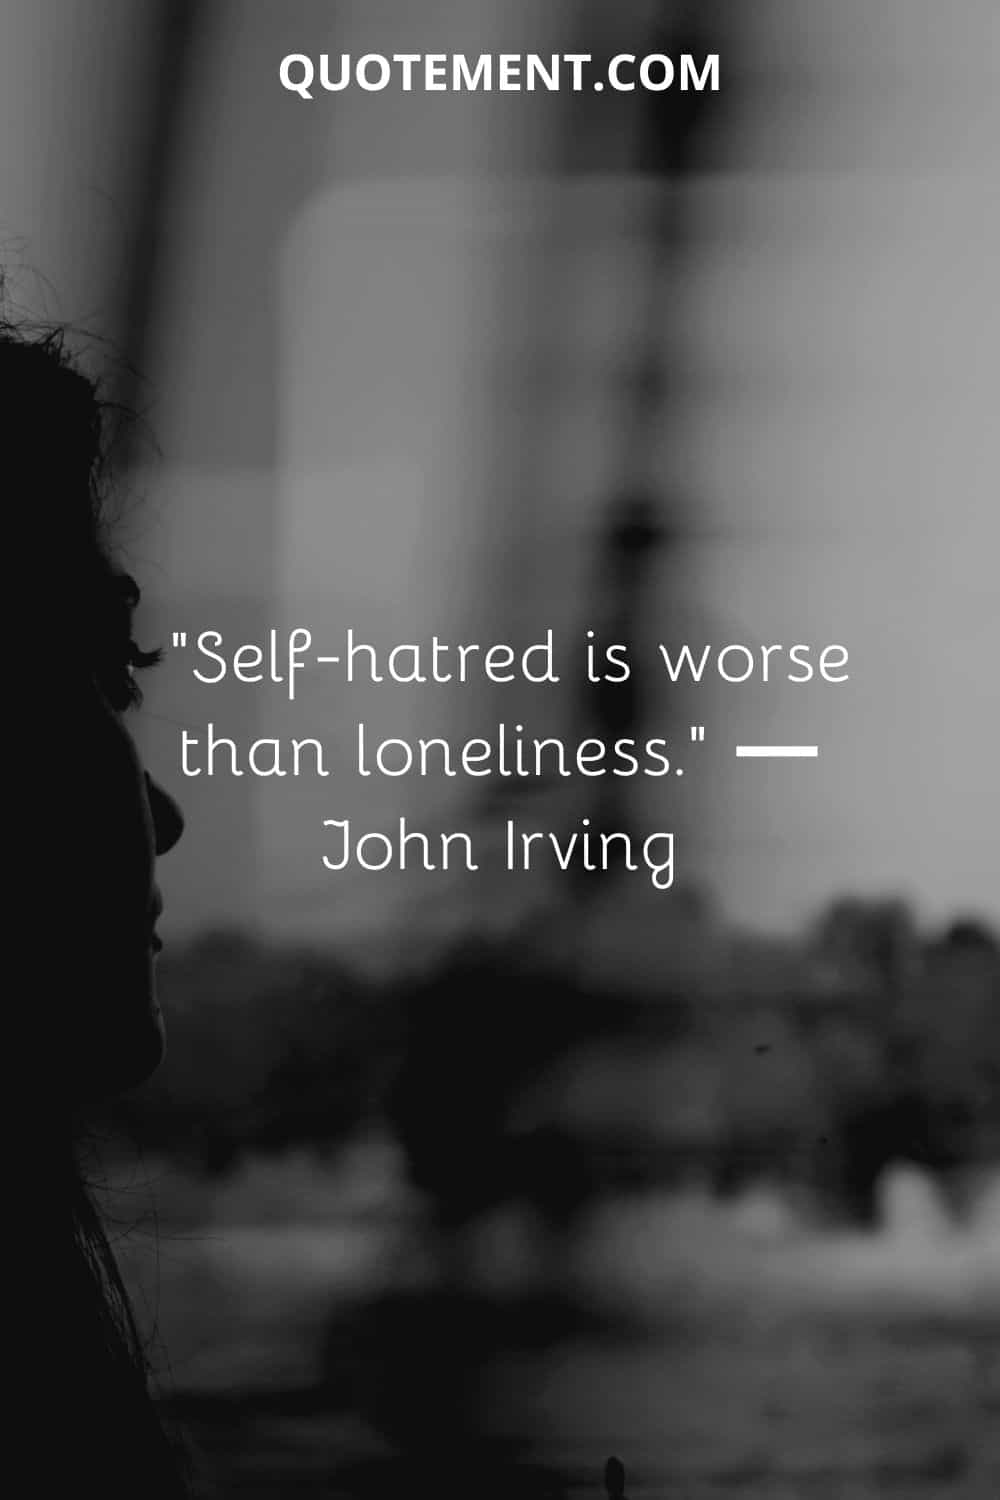 self-hatred is worse than loneliness